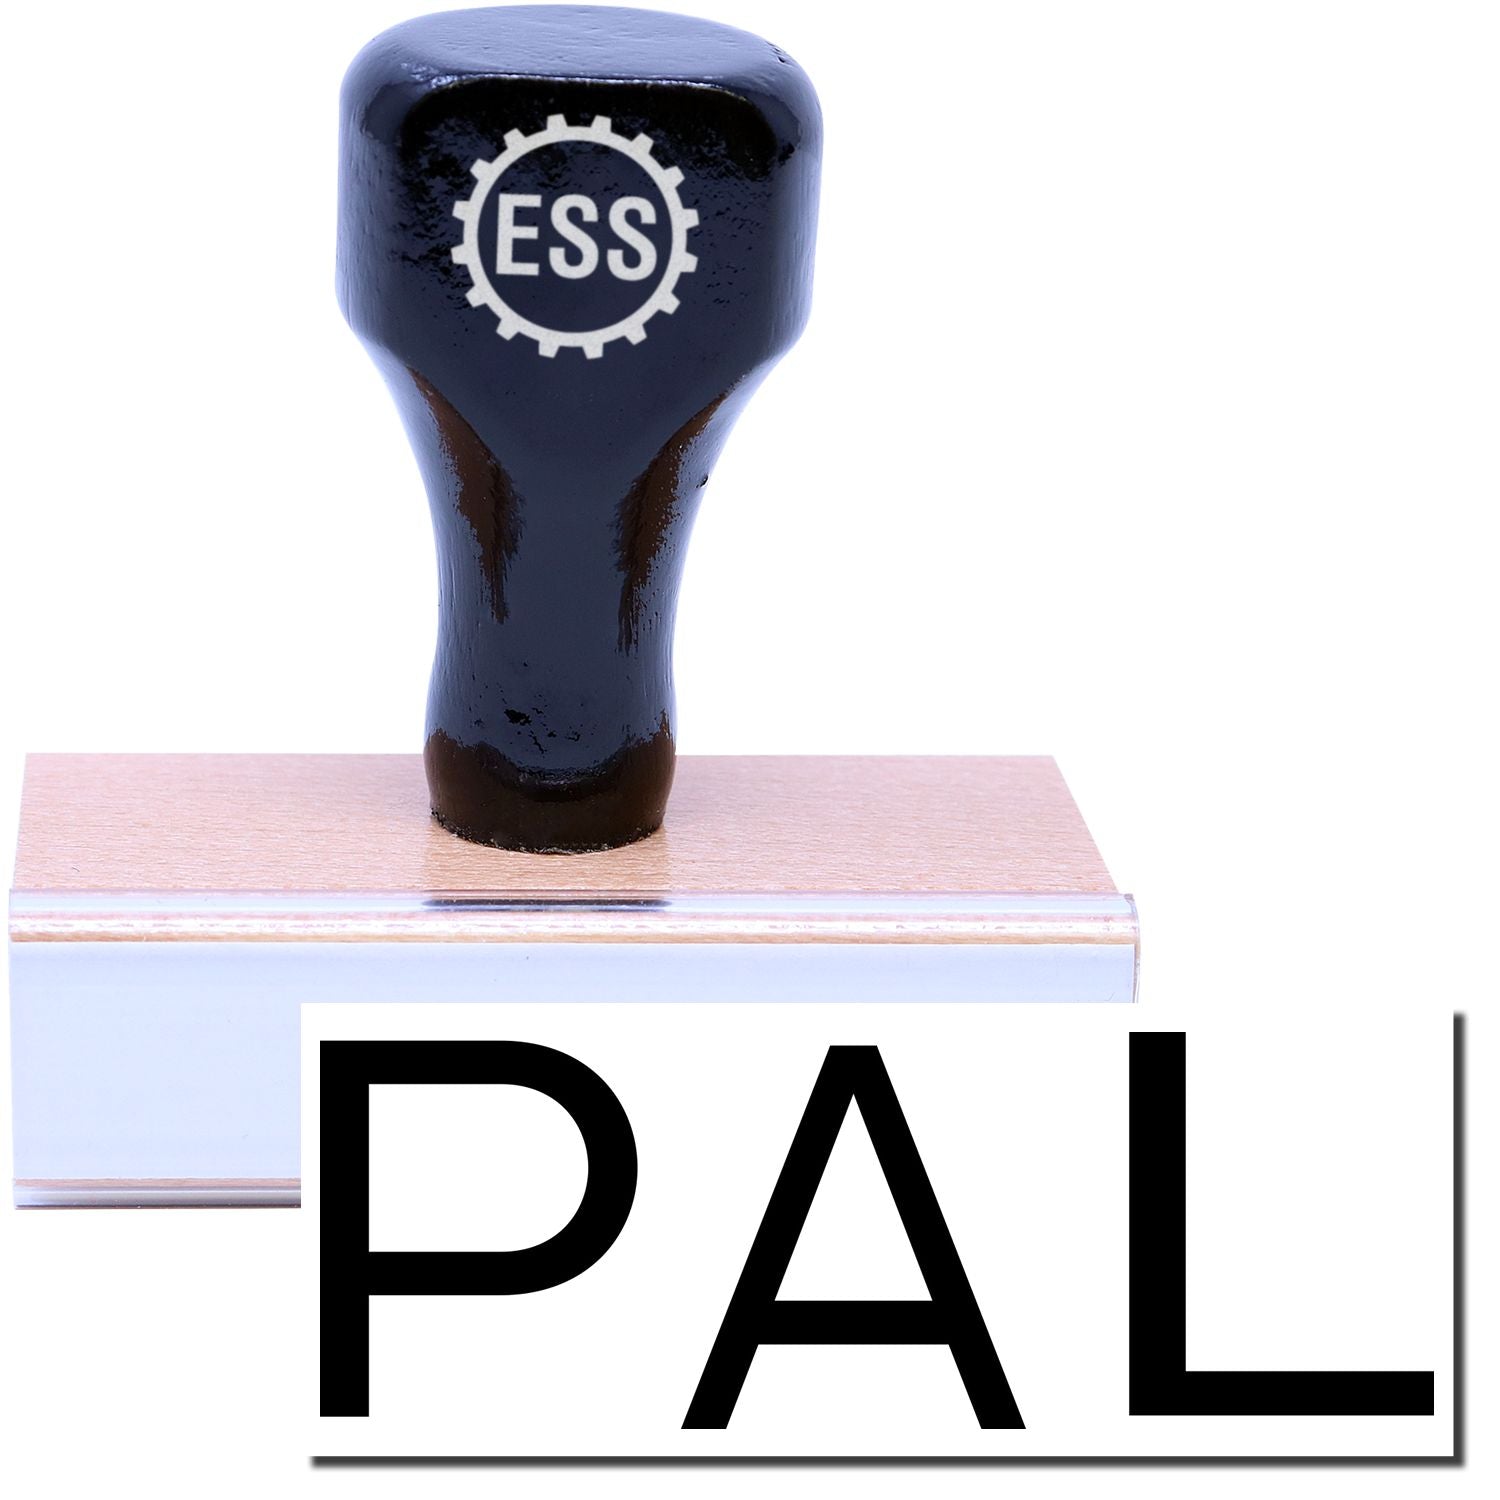 A stock office rubber stamp with a stamped image showing how the text "PAL" in a large font is displayed after stamping.